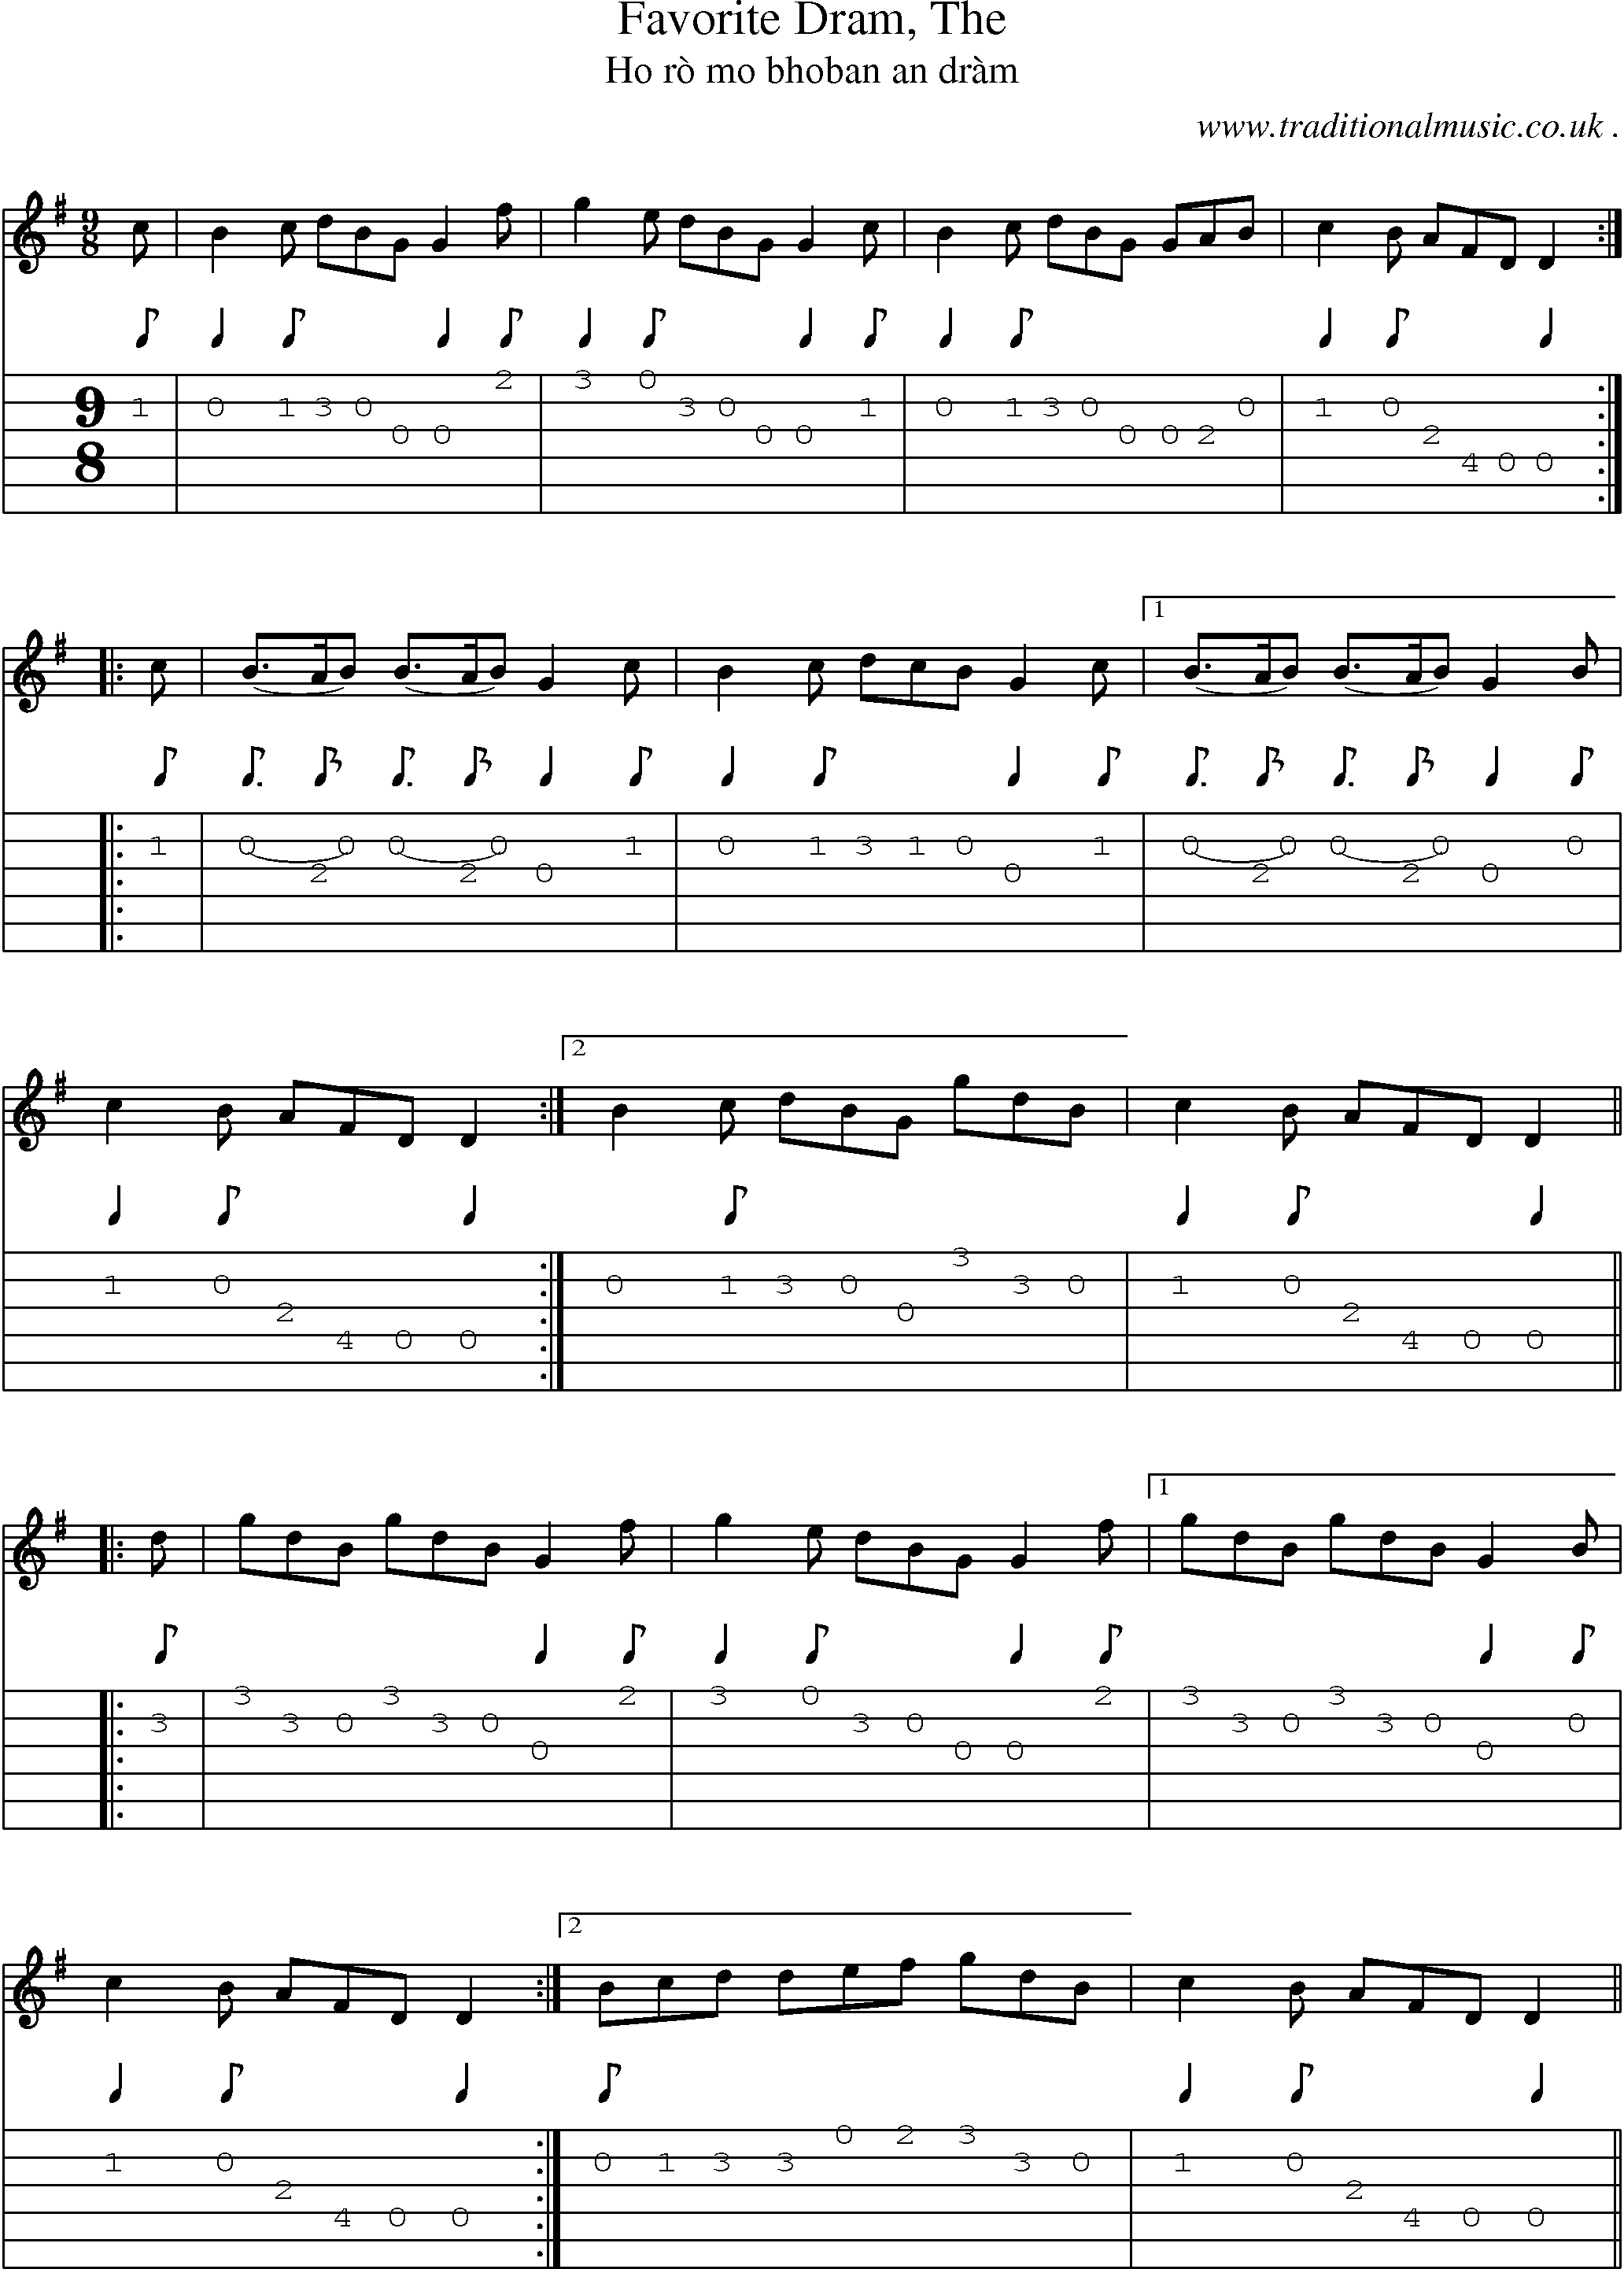 Sheet-music  score, Chords and Guitar Tabs for Favorite Dram The